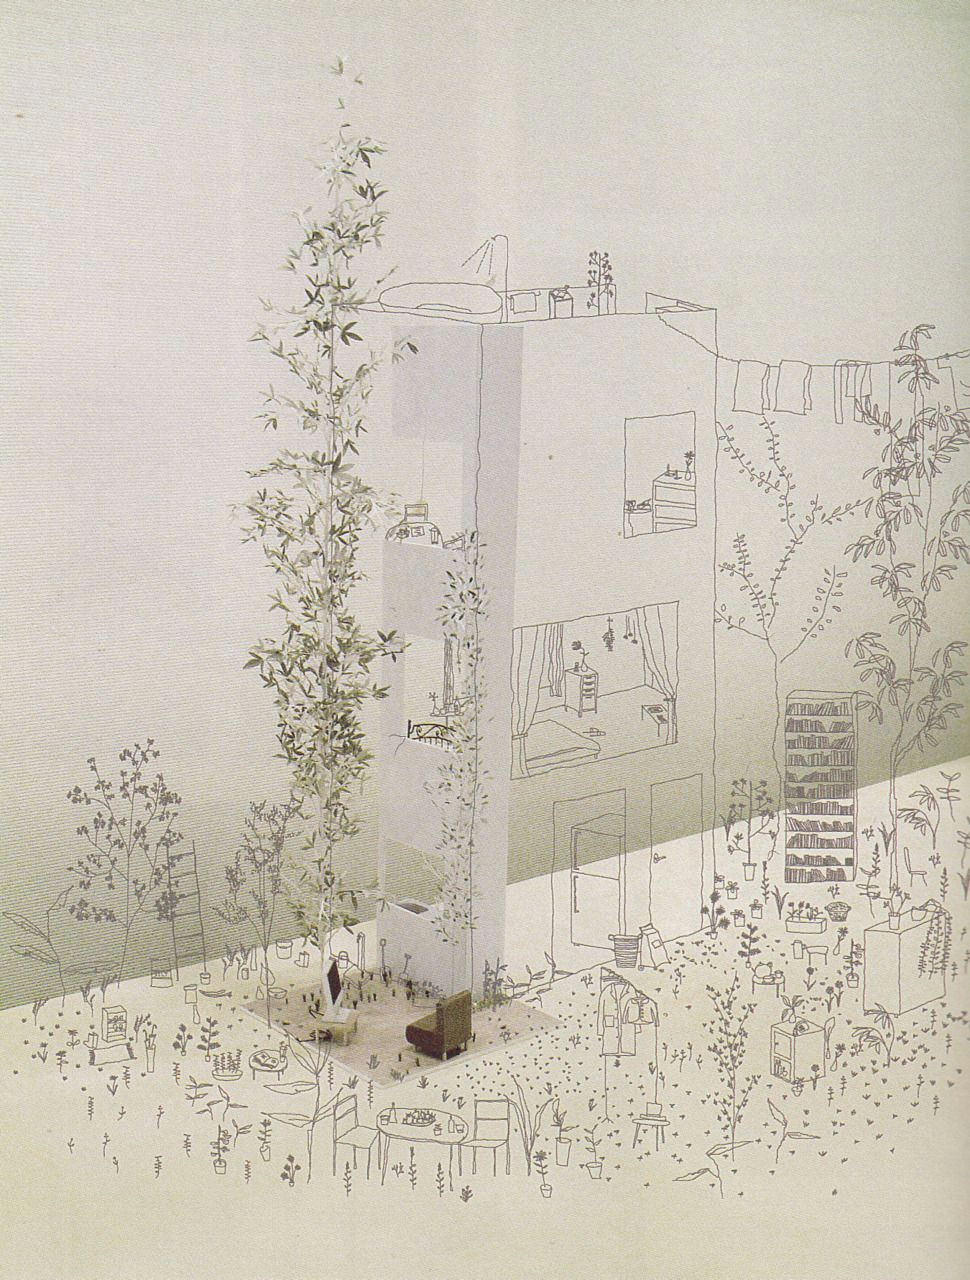 Drawing Architecture Tumblr Betonbabe A A A A Junya ishigami Row House In tokyo 2005 Betonbabe